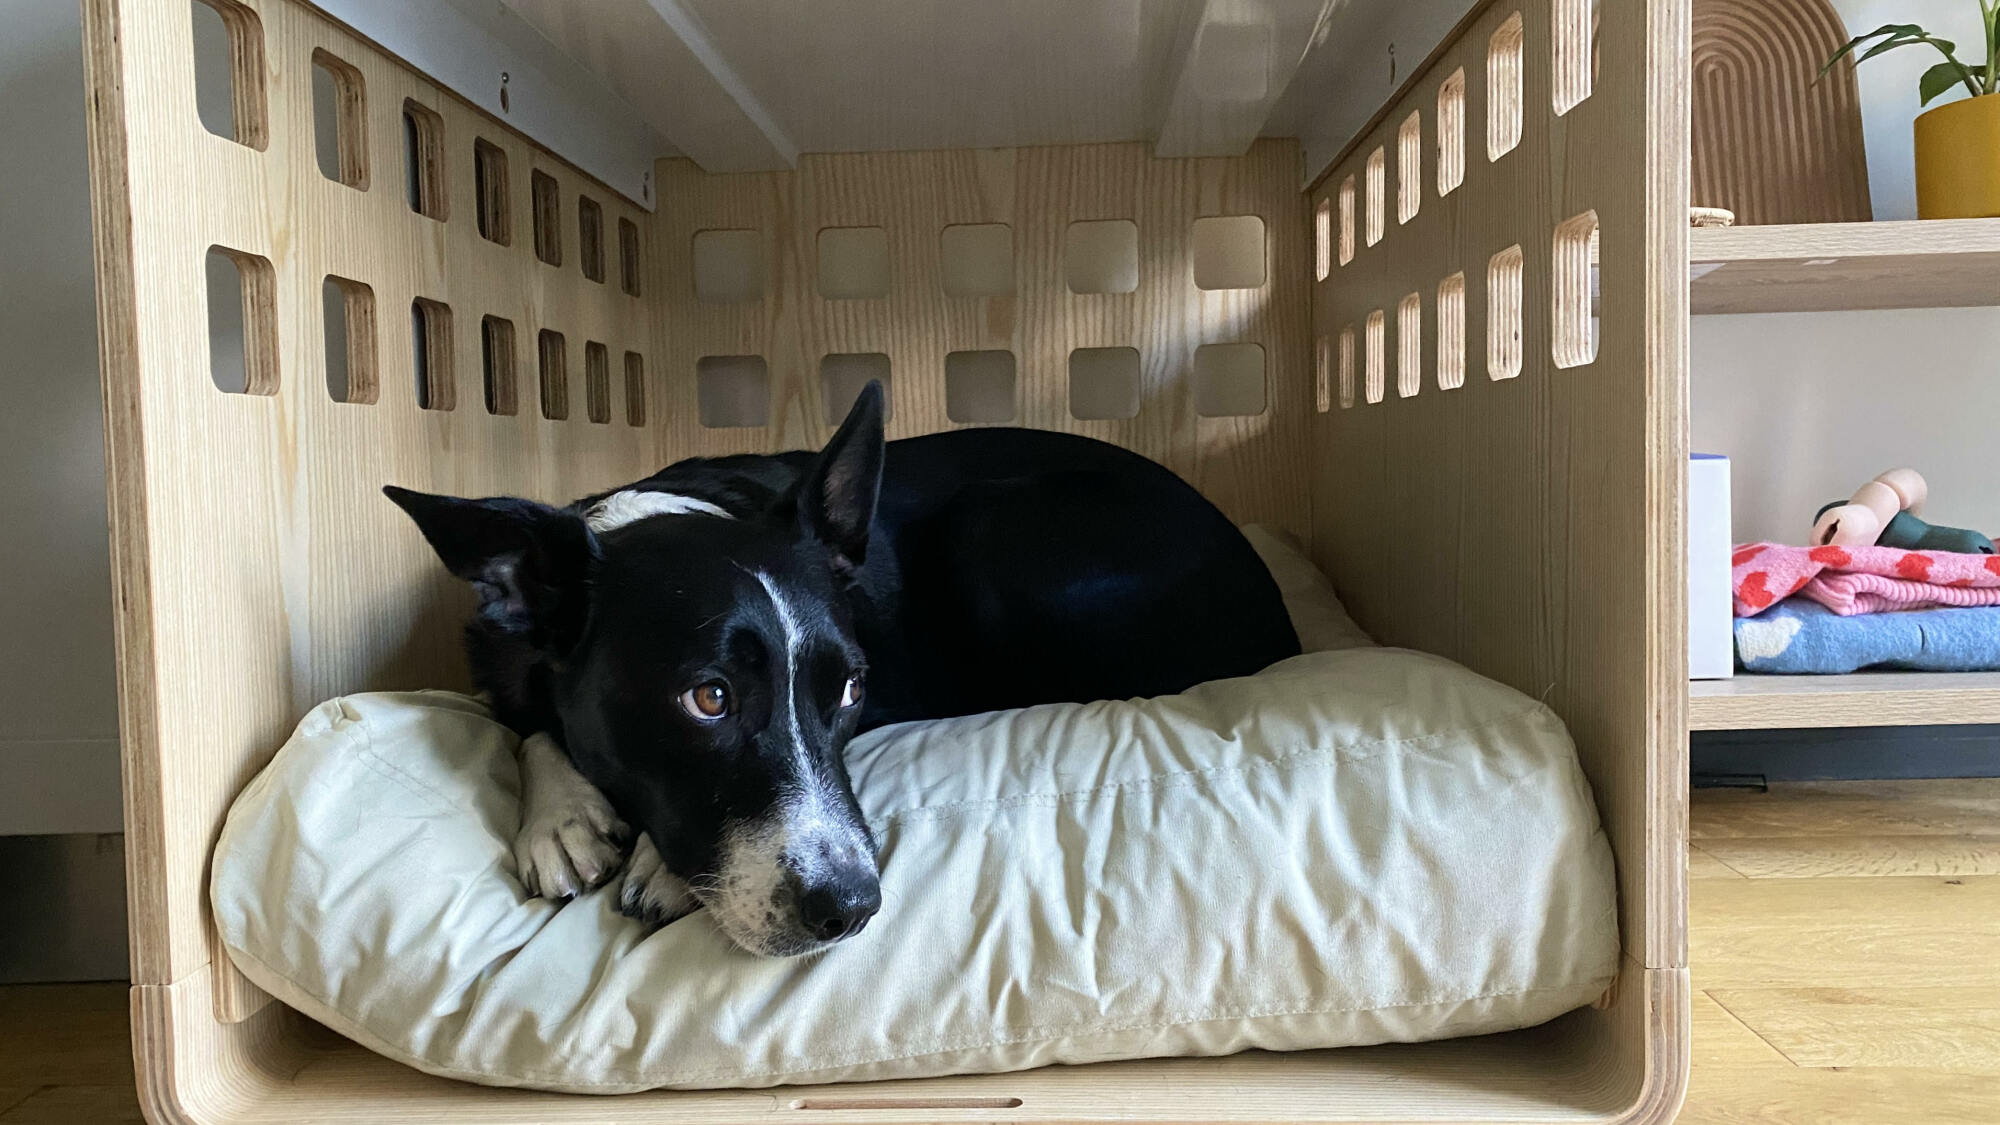 Black and white dog laying on a fluffy bed in a wooden dog crate